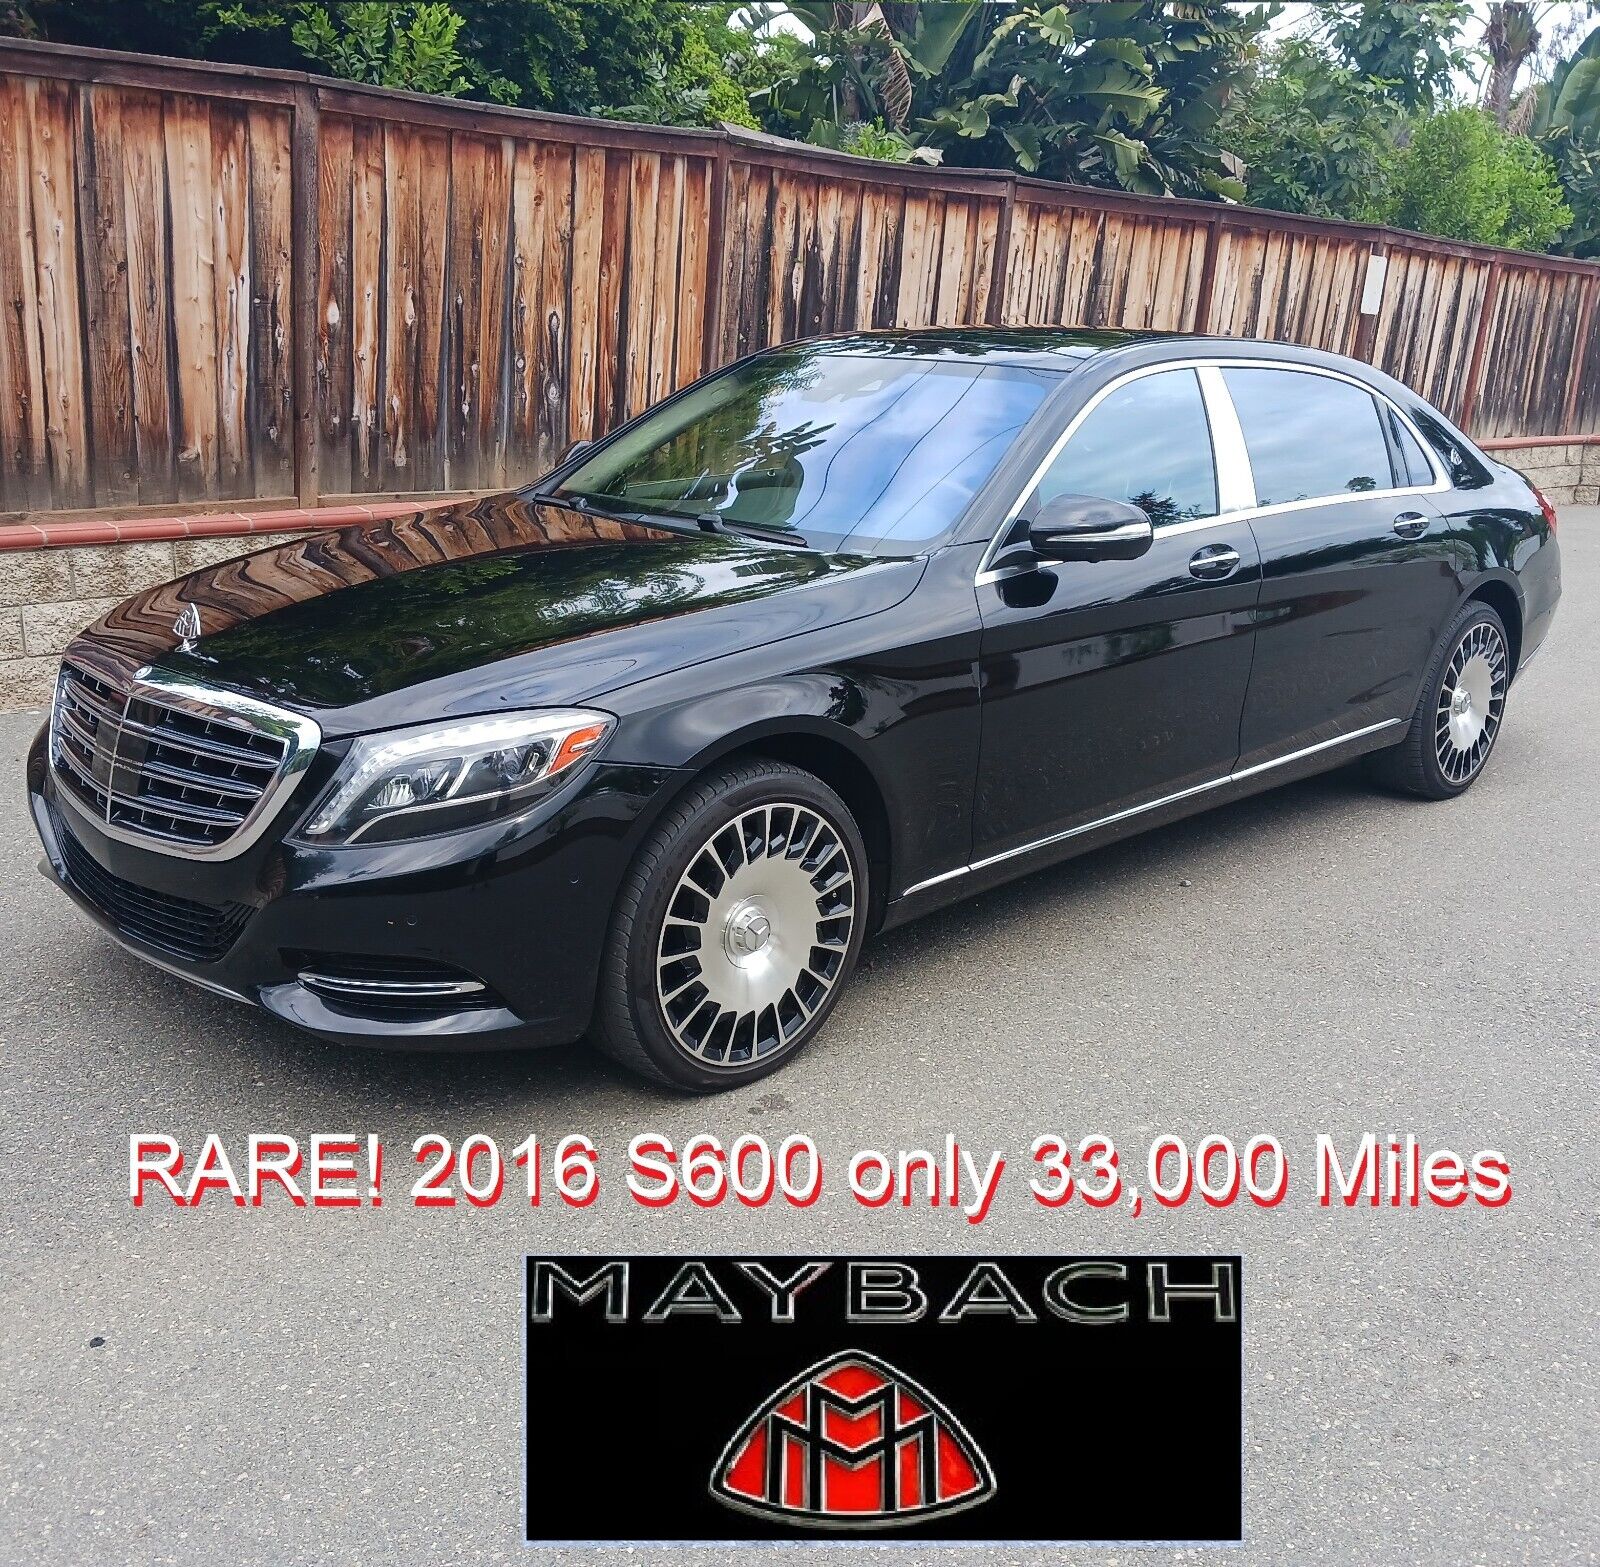 2016 Mercedes S600 Maybach 33,000 Miles V12 Twin-Turbo 523 H.P.  $192,000 MSRP